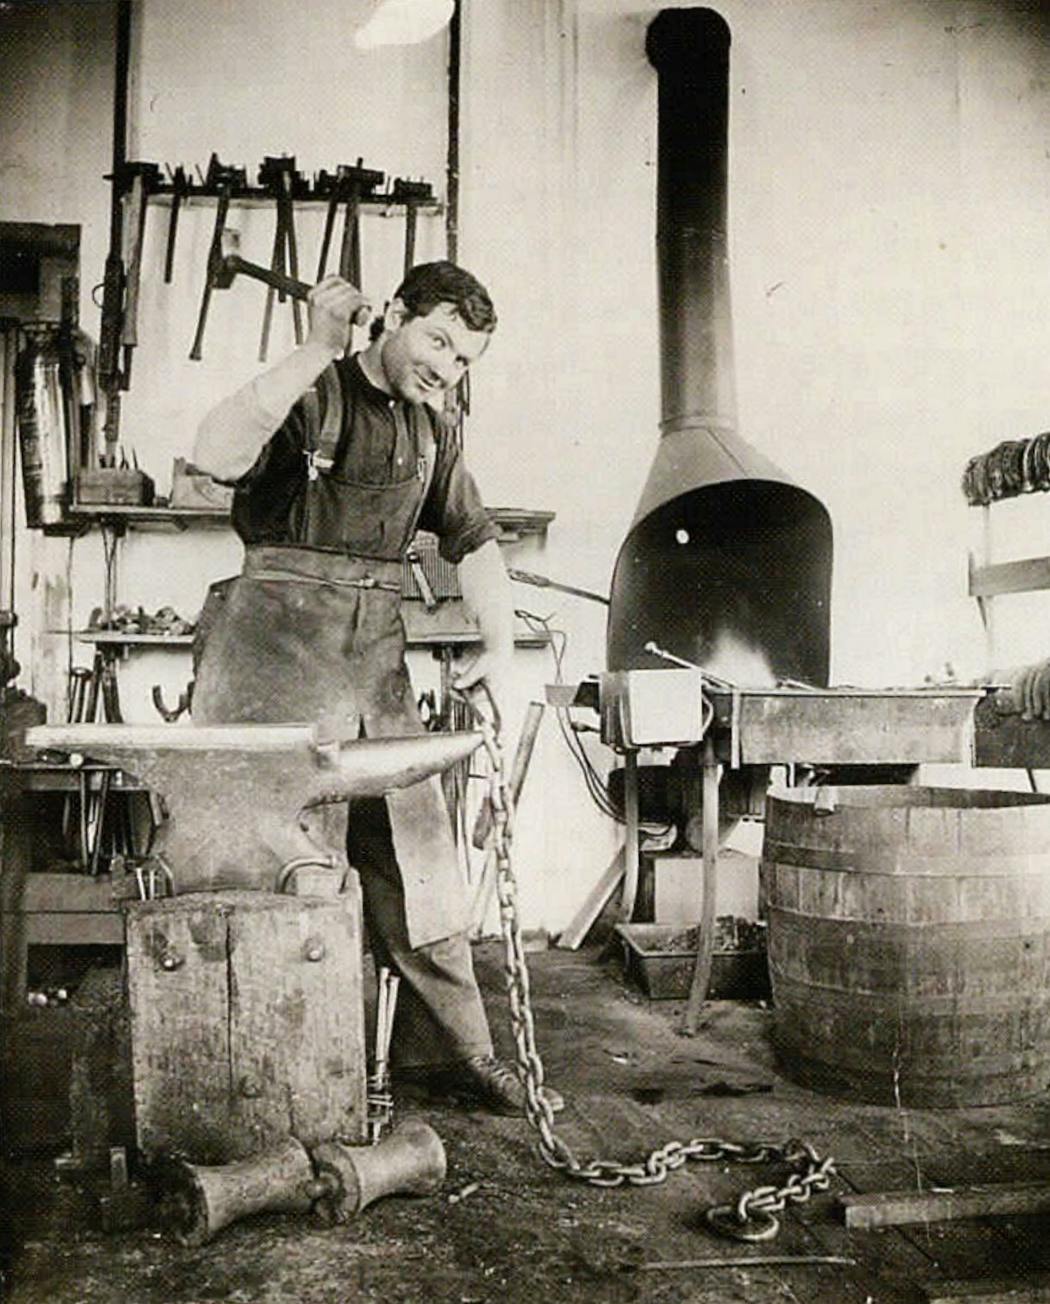 Brother Justus Trettel, a blacksmith at St. John's Abbey, is thought to have made stills for Stearns County farmers and shared knowledge of making whiskey safely during Prohibition.